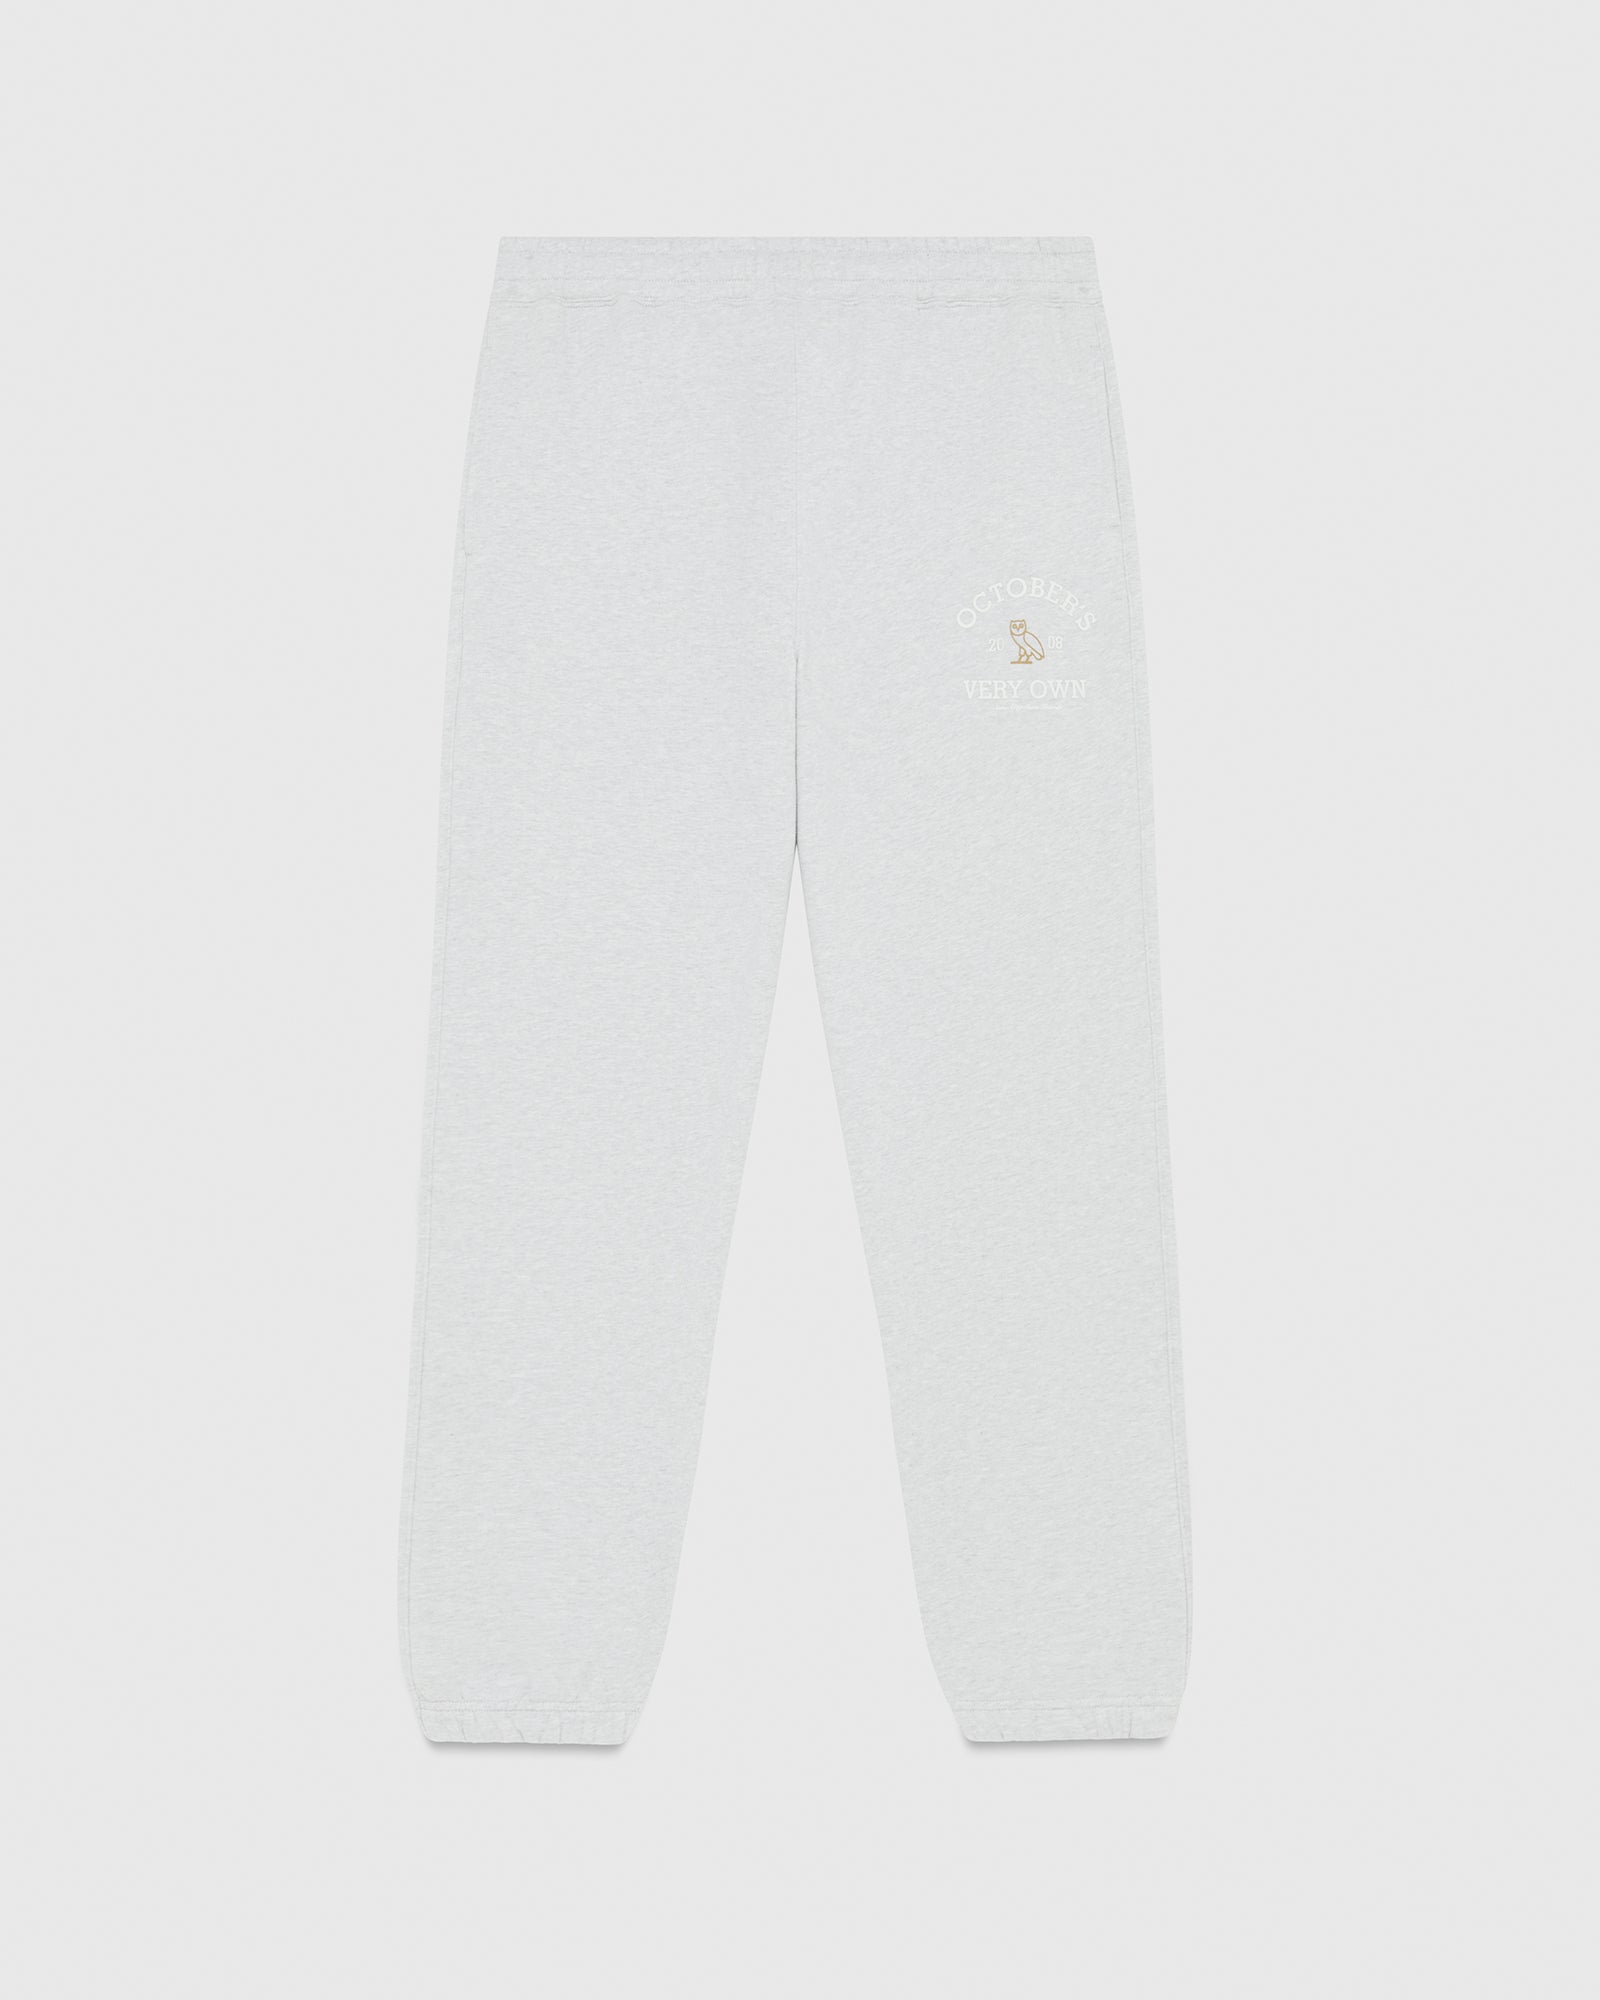 Collegiate Relaxed Fit Sweatpant - Ash Heather Grey